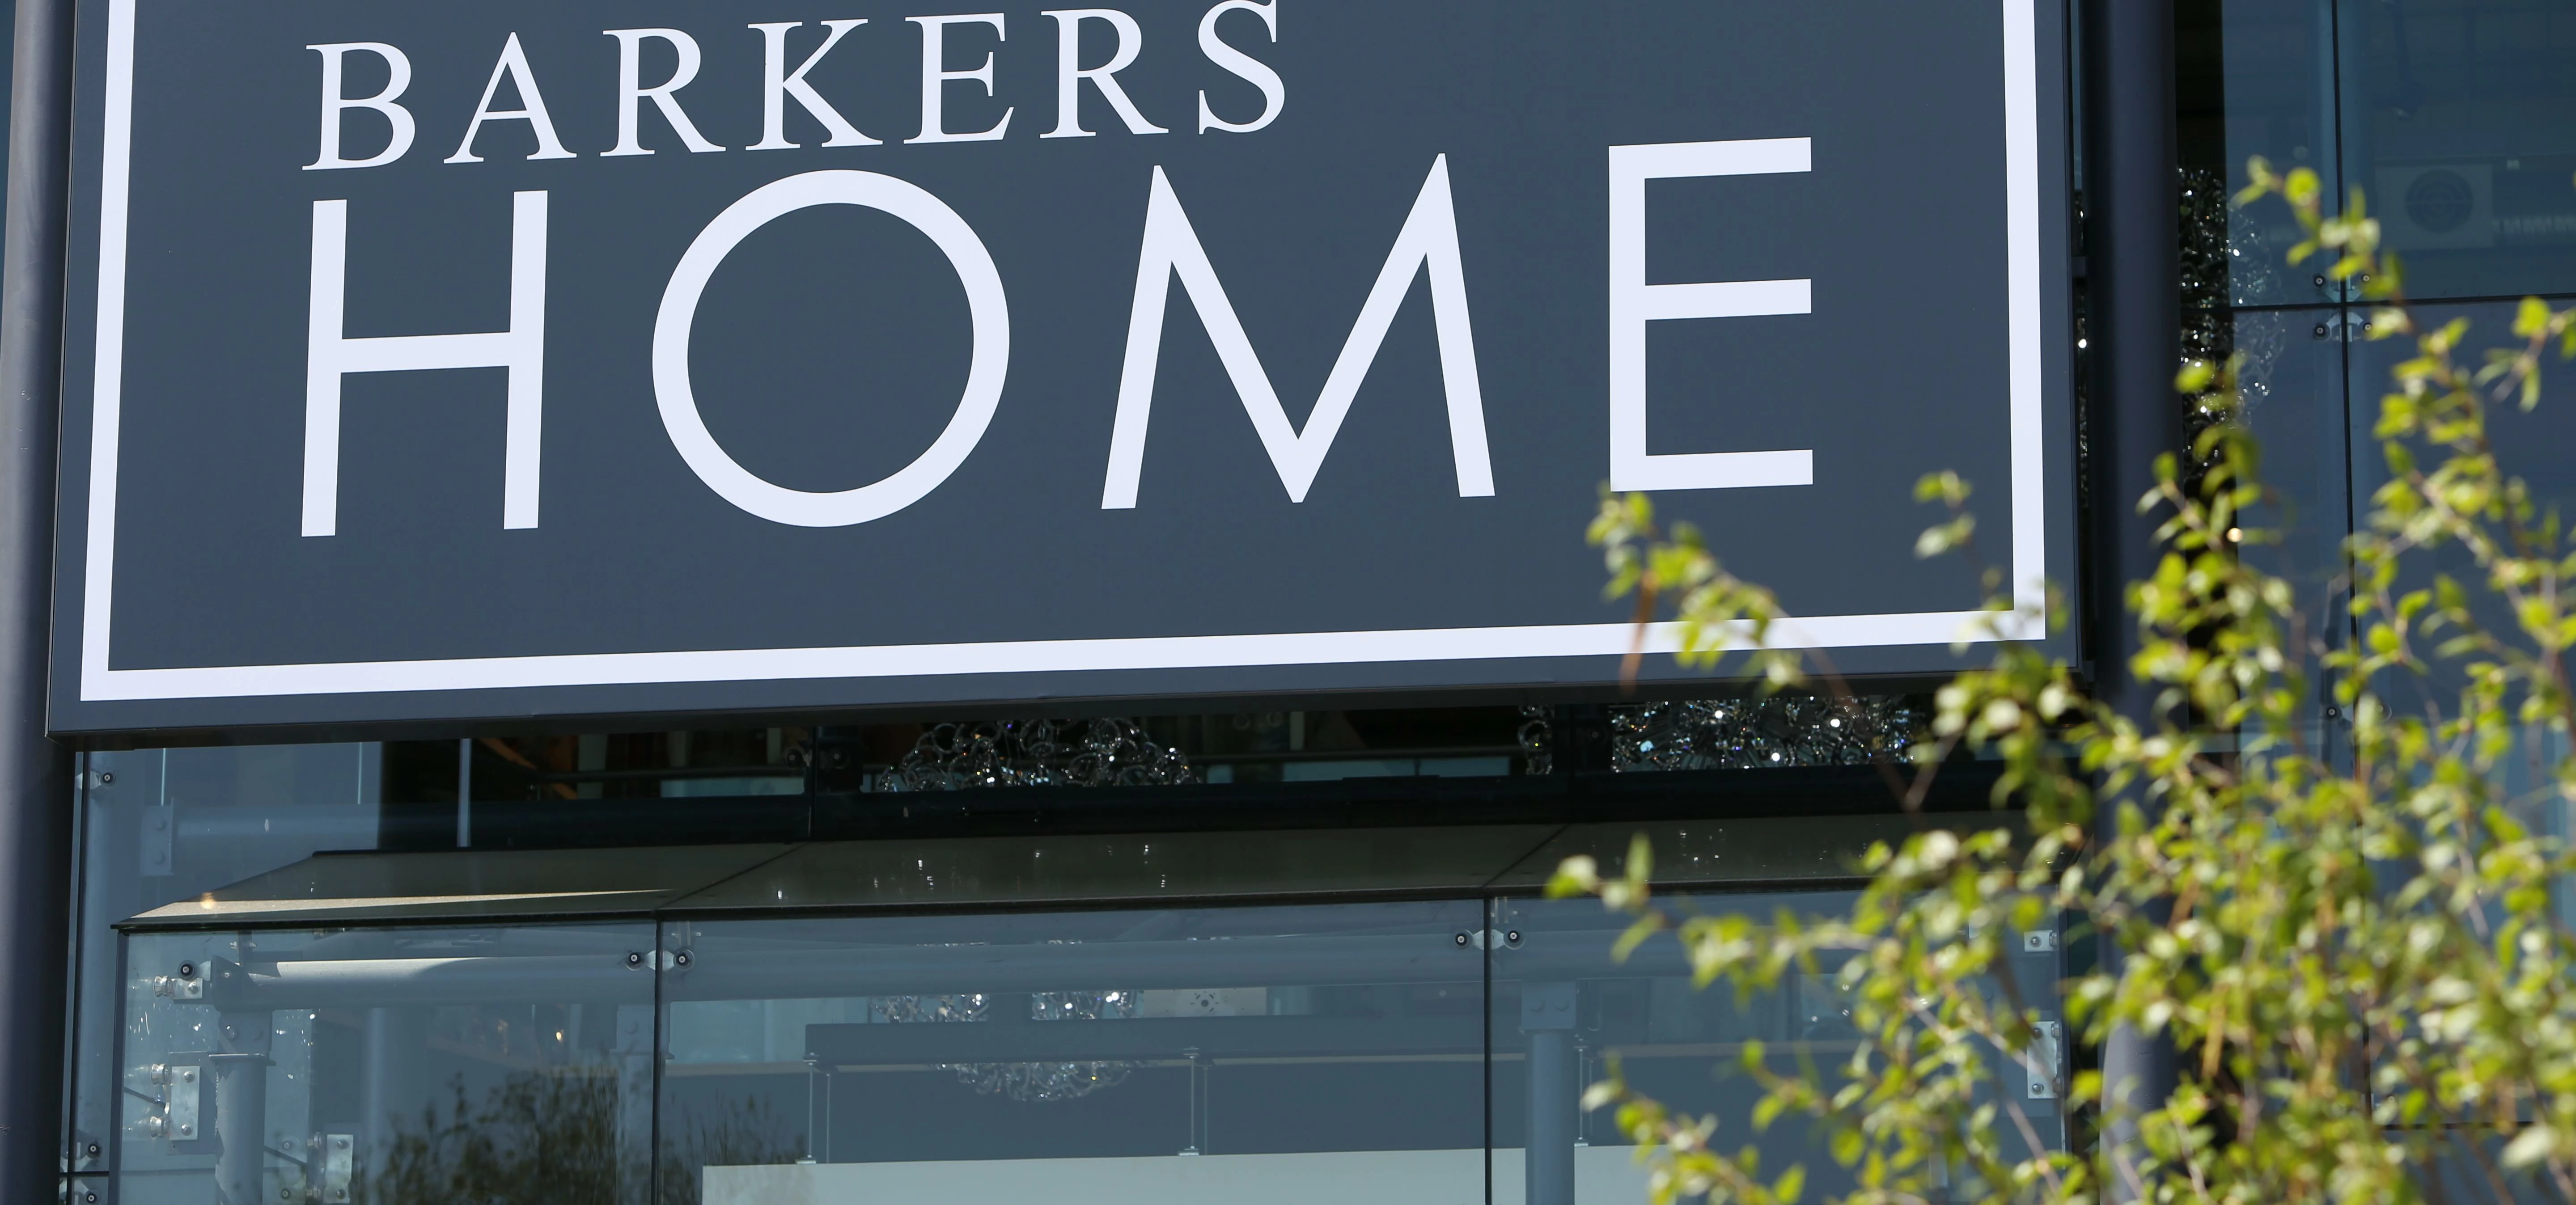 Award-winning Barkers Home is drawing in customers from all over the north